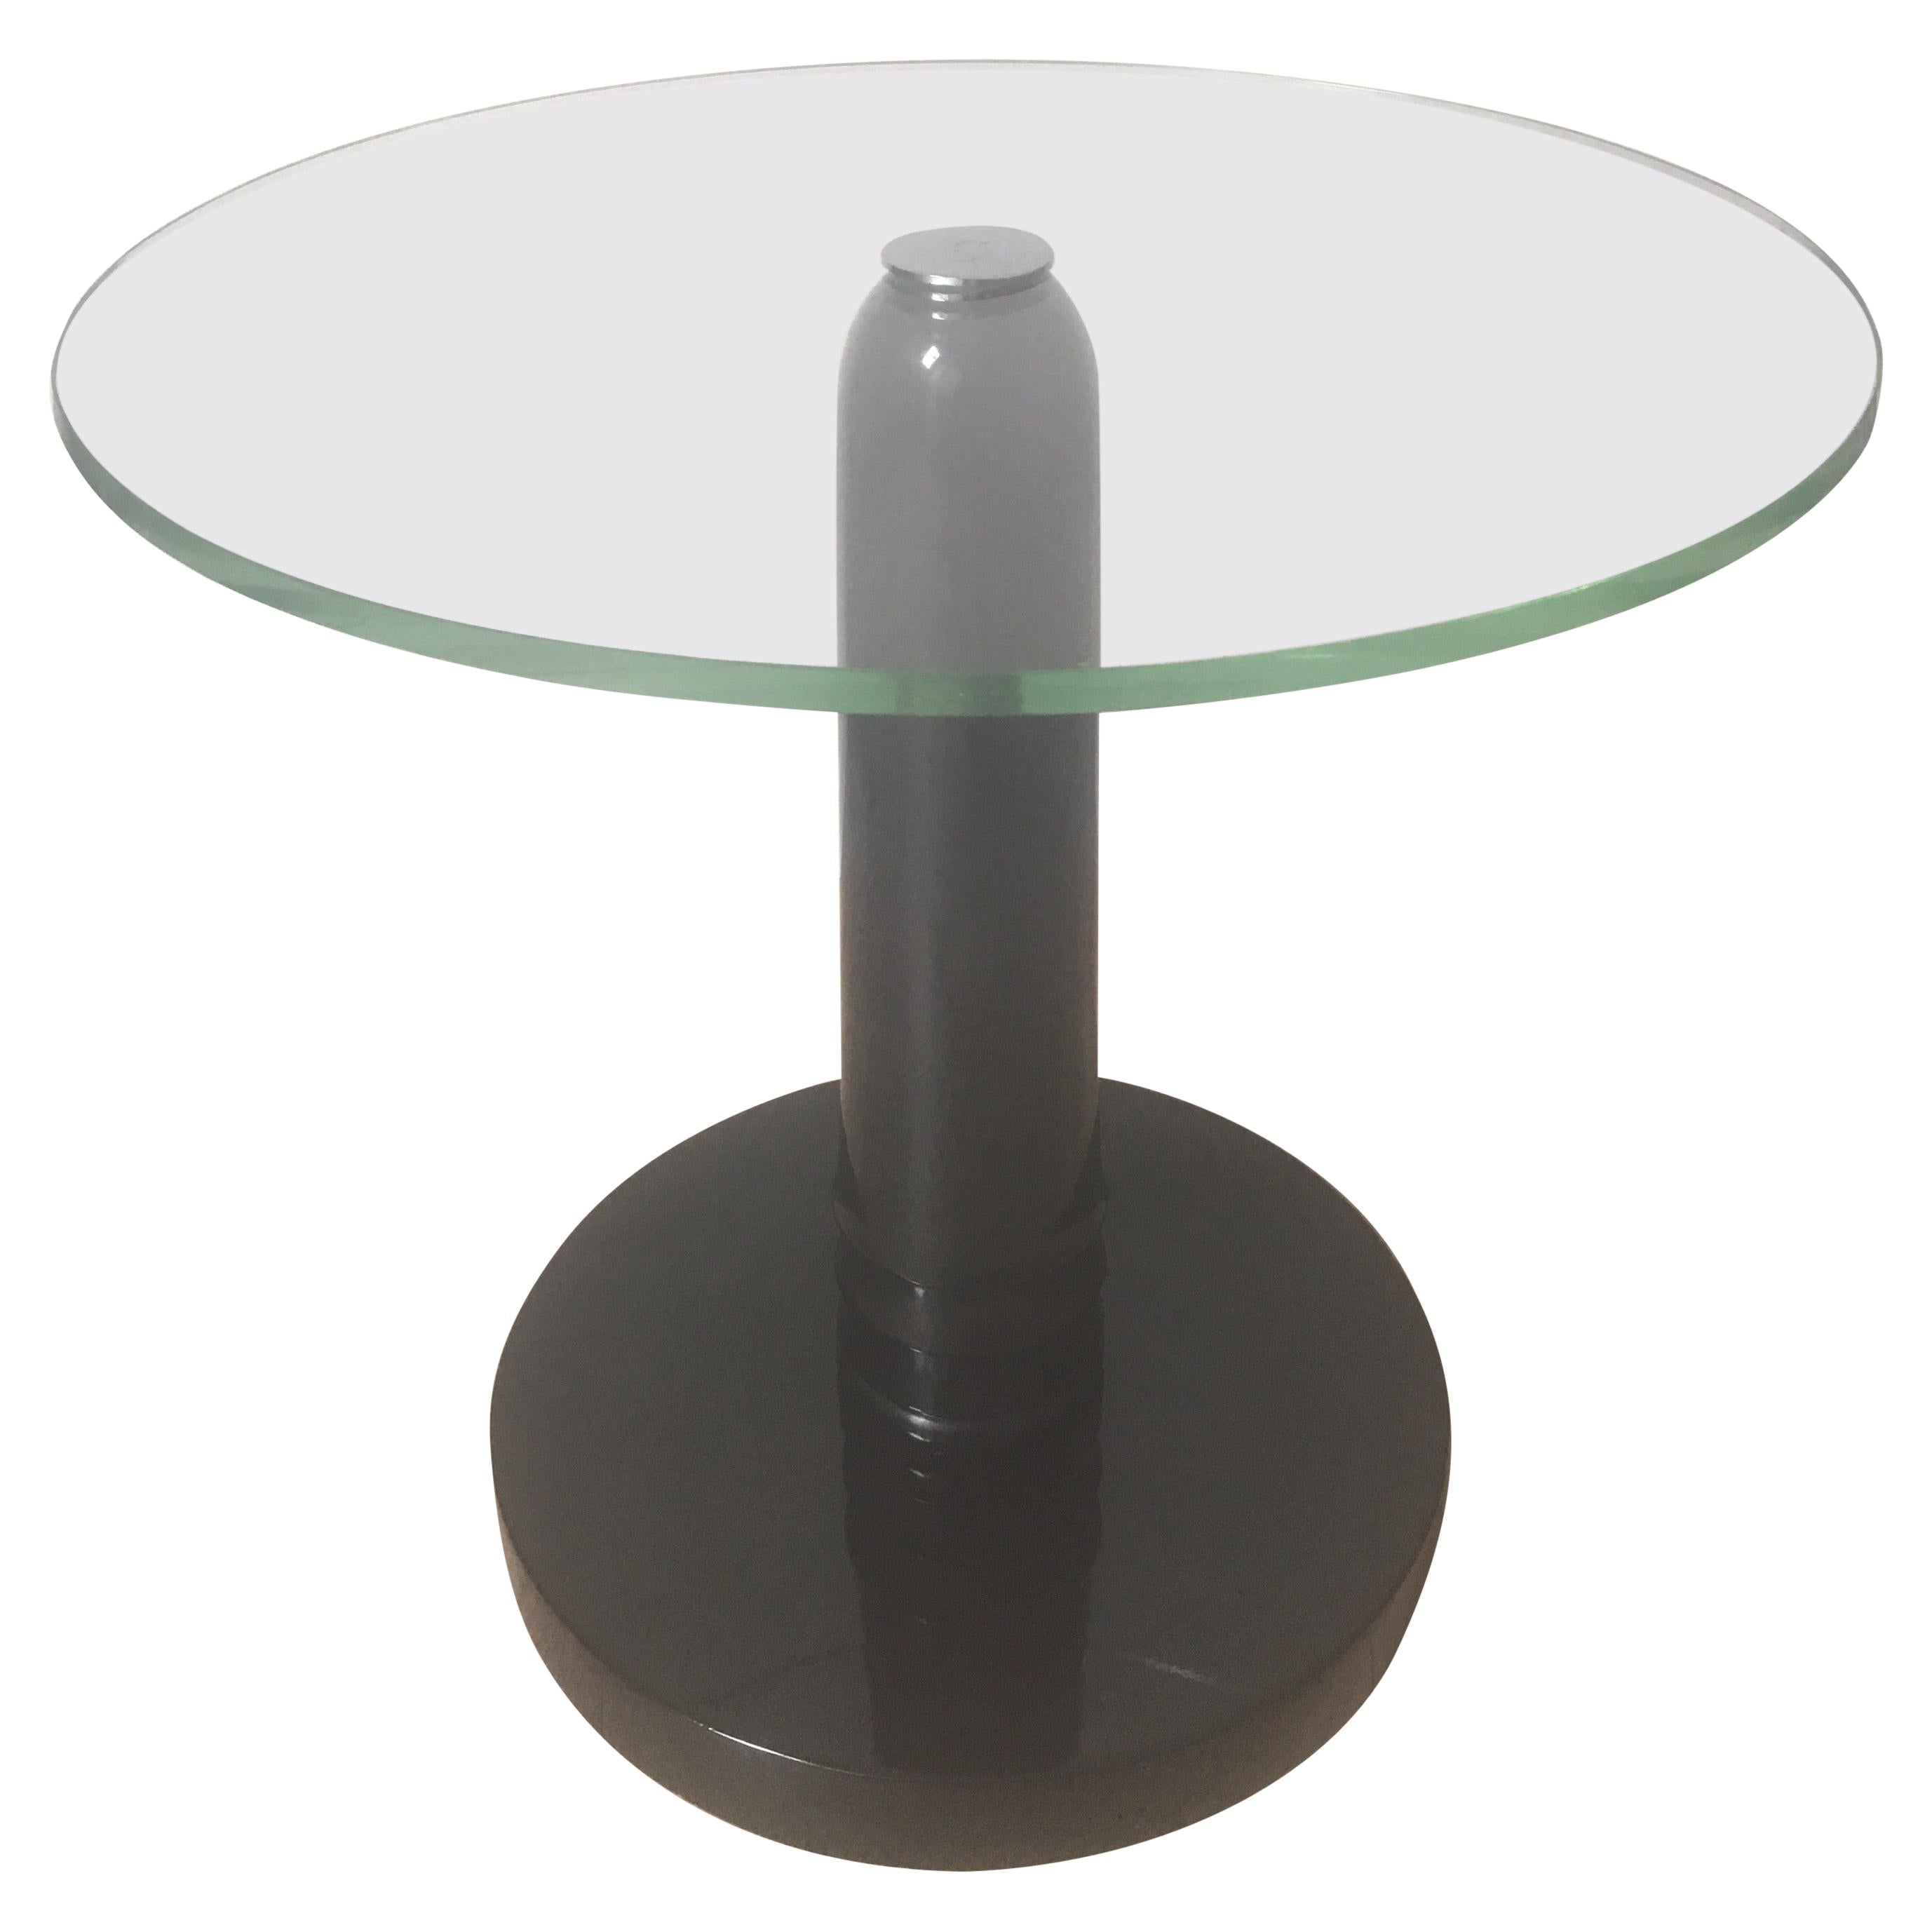 René Drouet Brown Lacquer Wood Coffee Table, Circular Glass Slab Top, 1930 For Sale